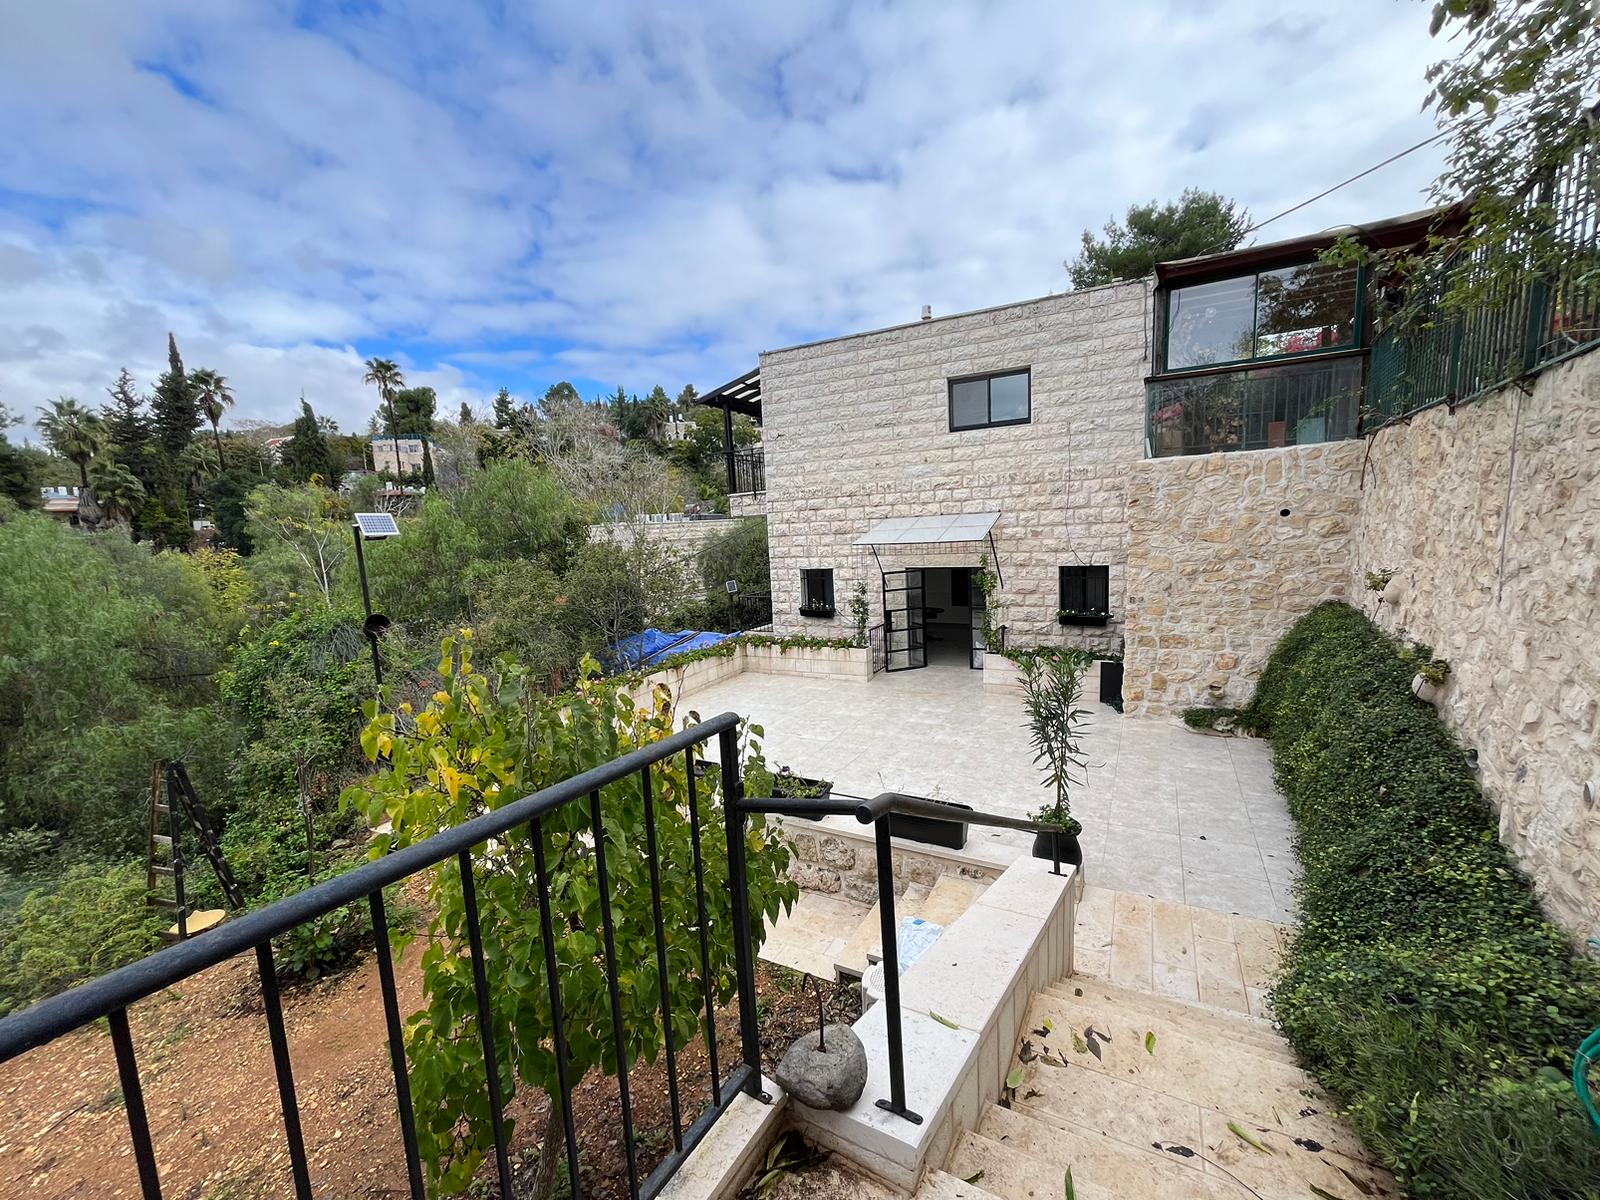 For Sale: A Unique Stand Alone House in the Heart of Ein Karem